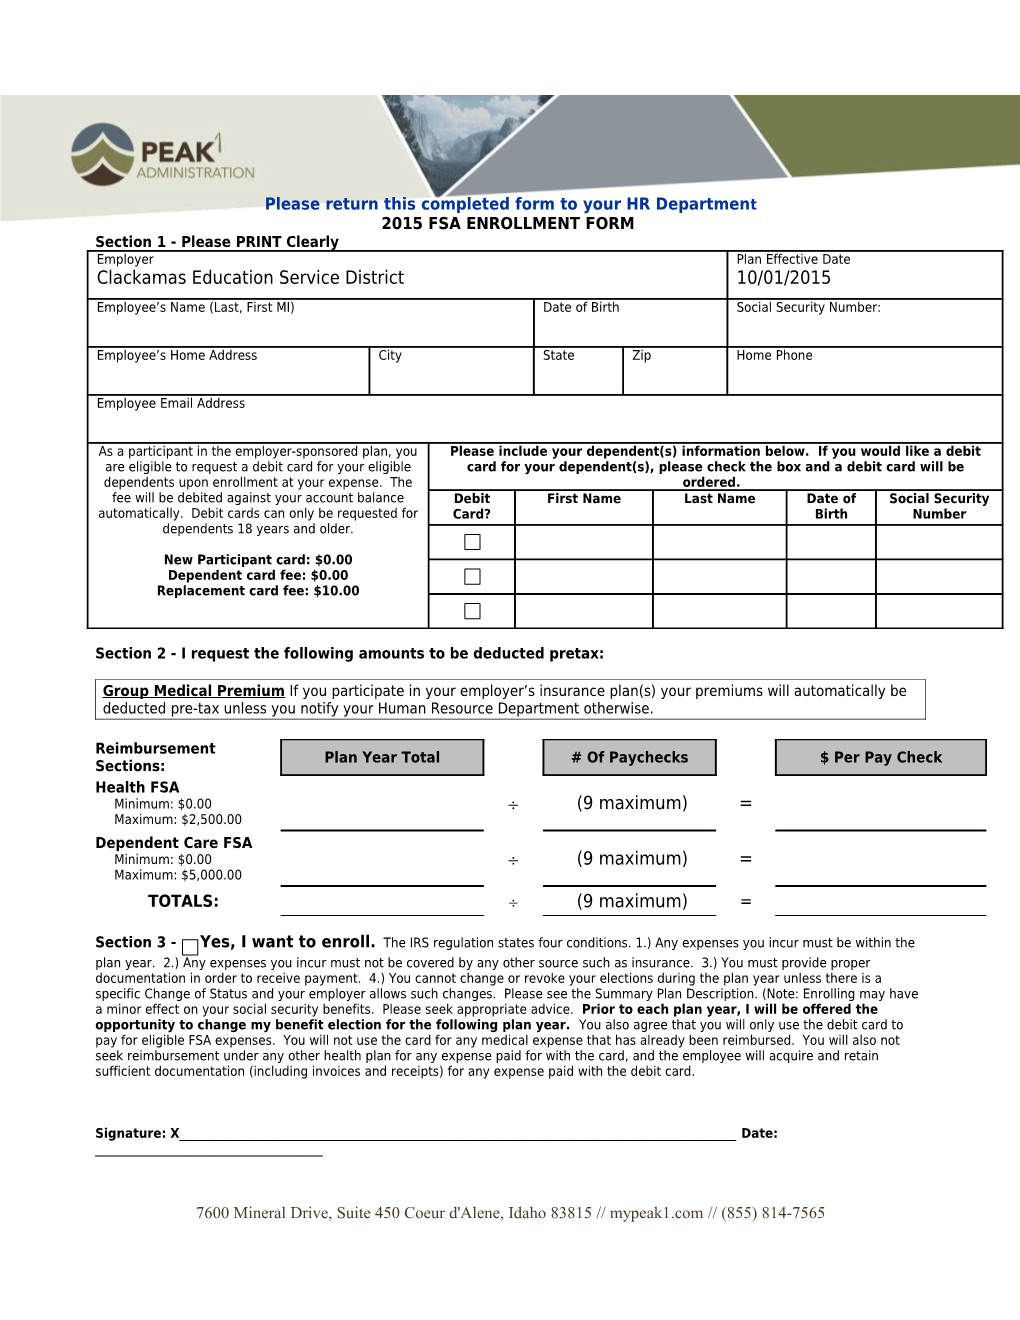 Please Return This Completed Form to Your HR Department